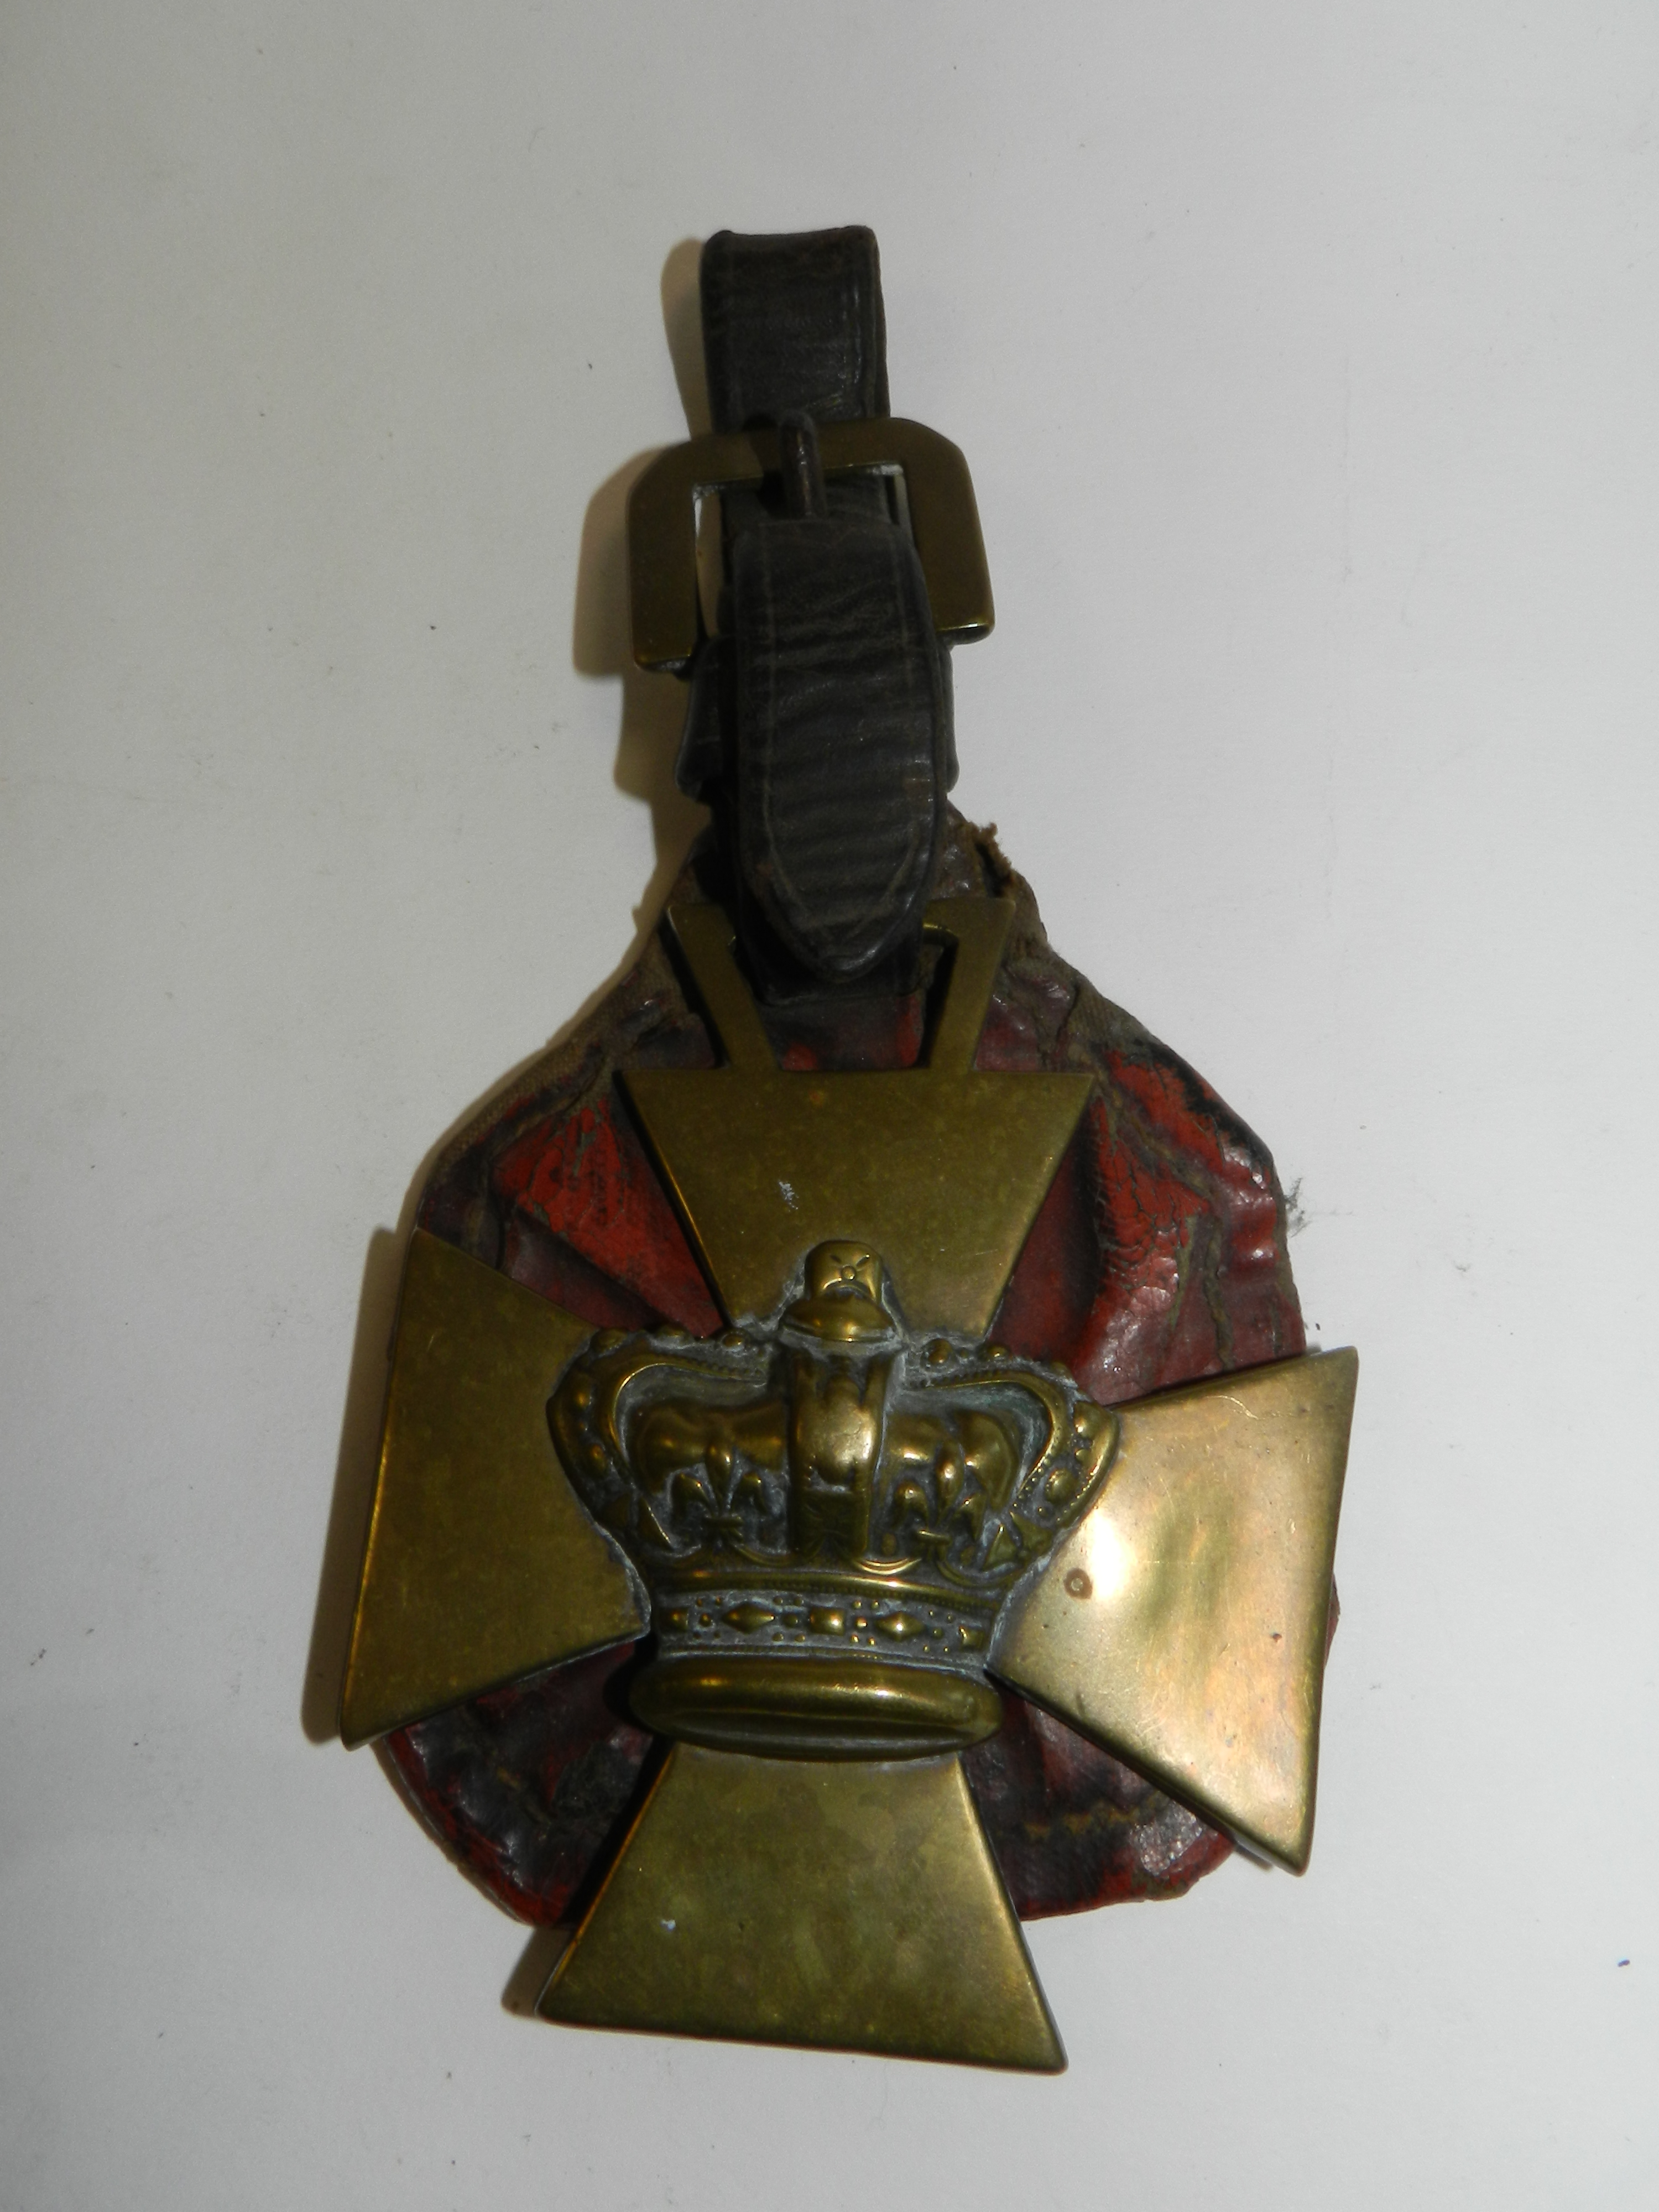 A 19th century Maltese cross horse brass mounted with crown